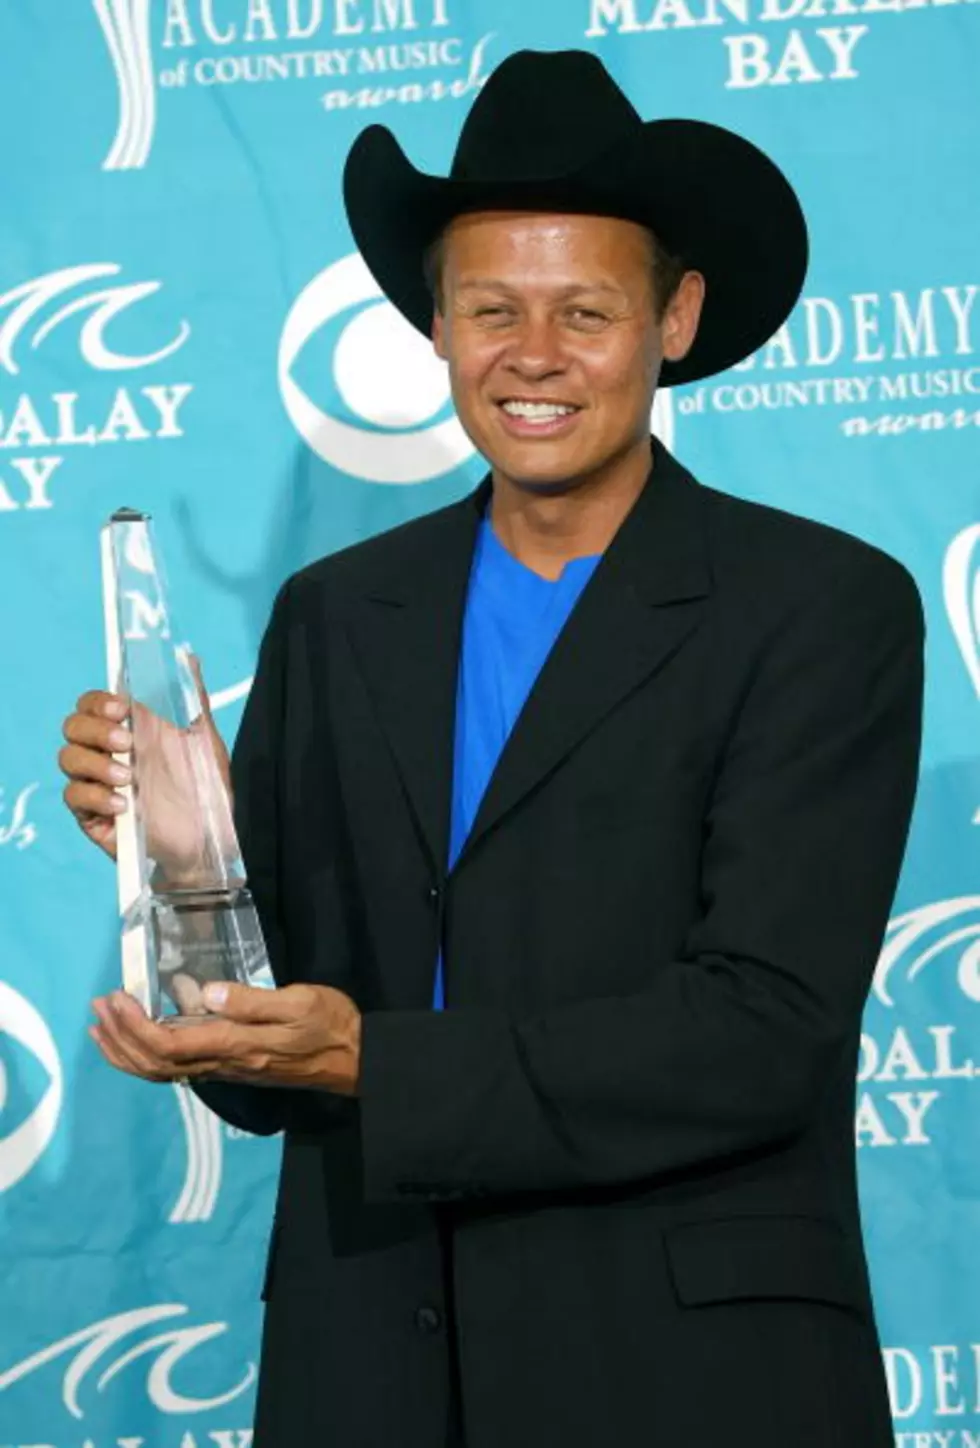 Neal McCoy’s Father Passed Away on Saturday